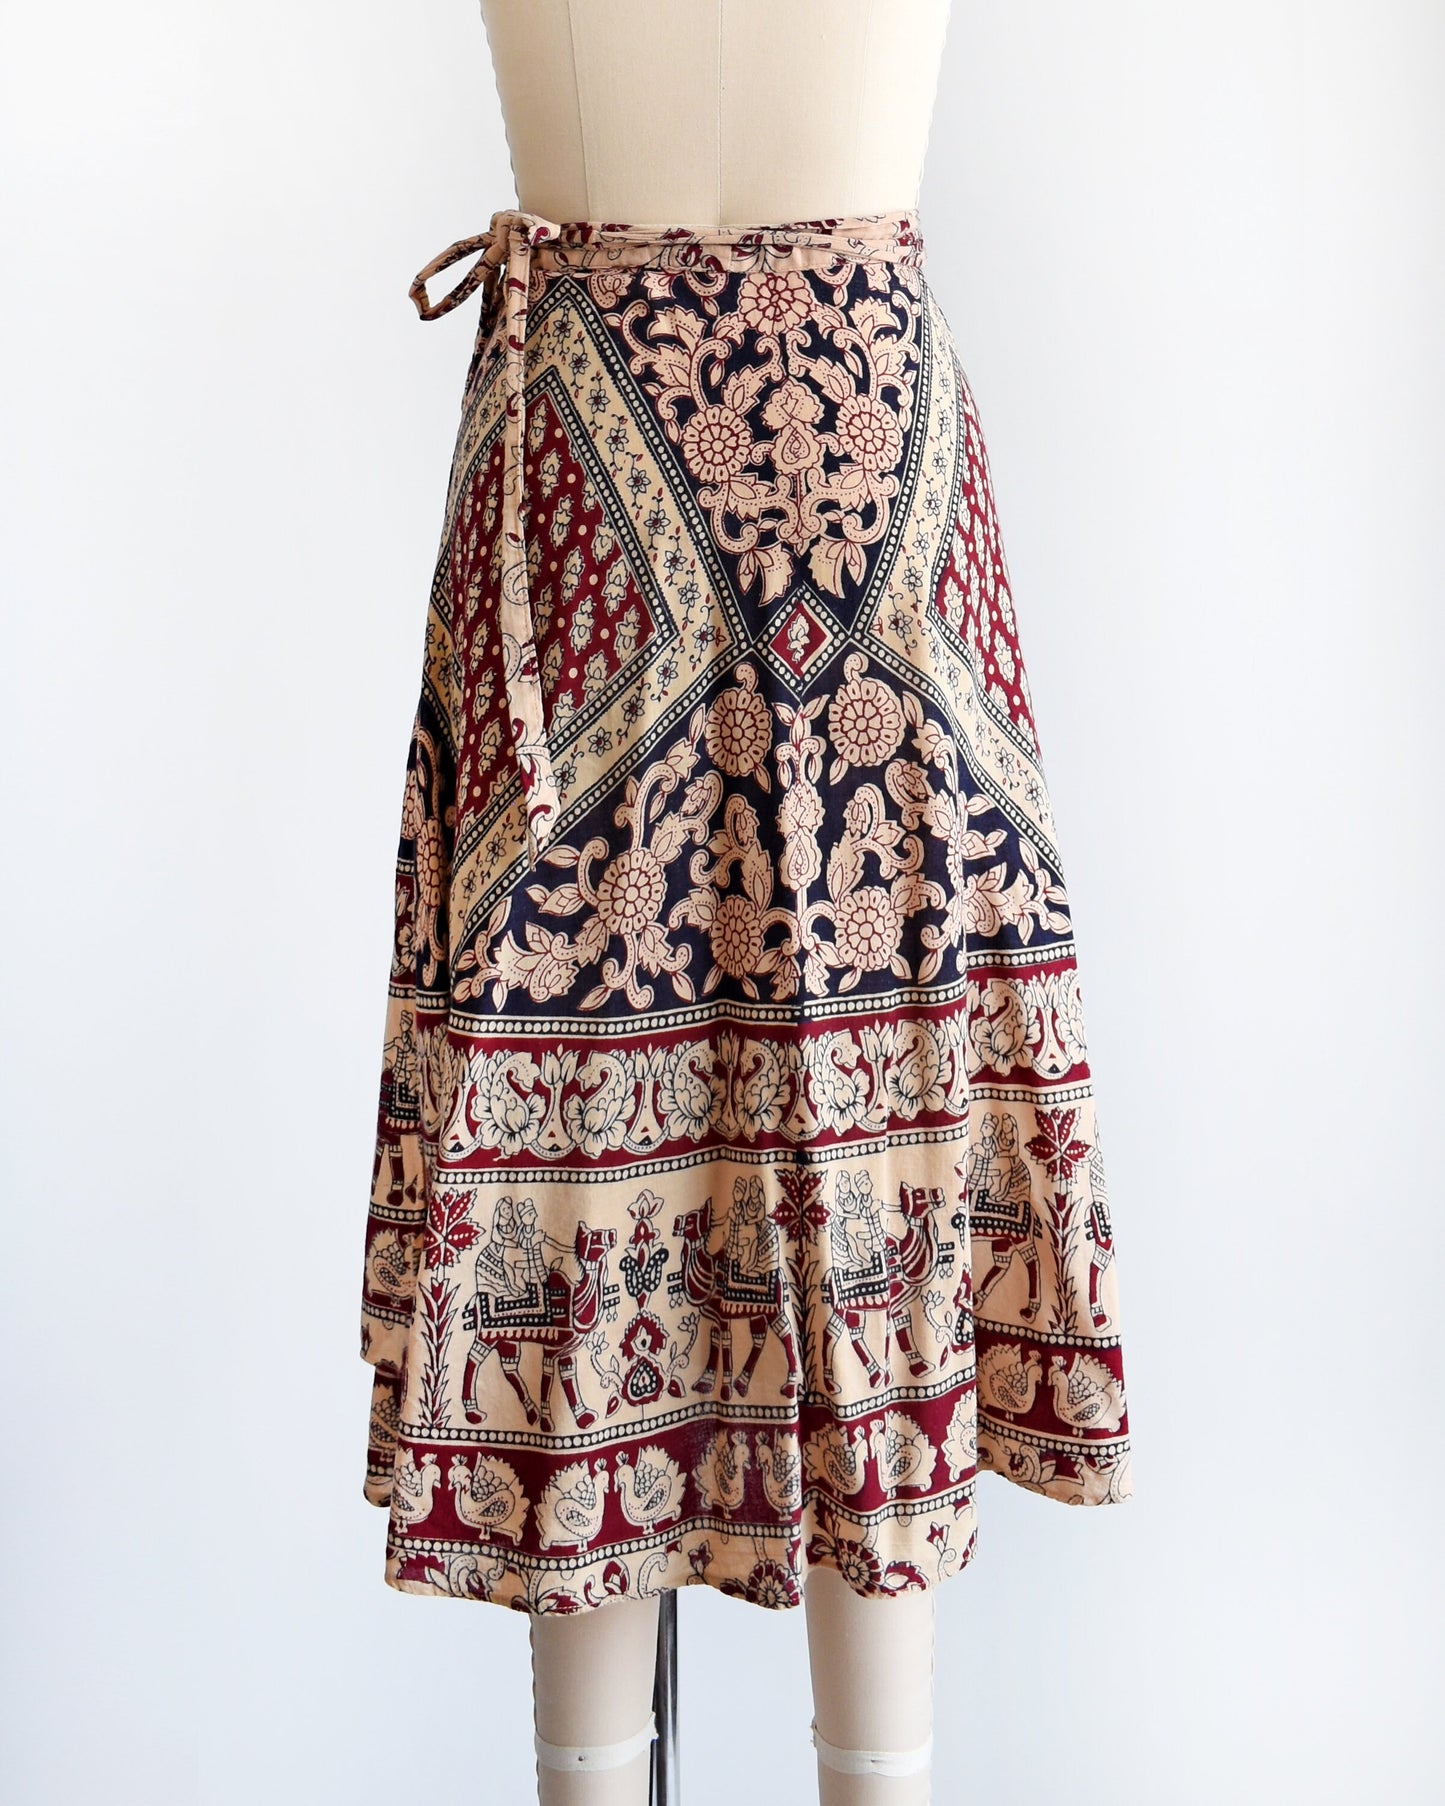 Back view of a vintage 1970s cotton wrap skirt that is beige with a large burgundy and black batik block floral print that covers the entire skirt, along border prints of people riding camels and a bird print. Skirt is on a dress form.